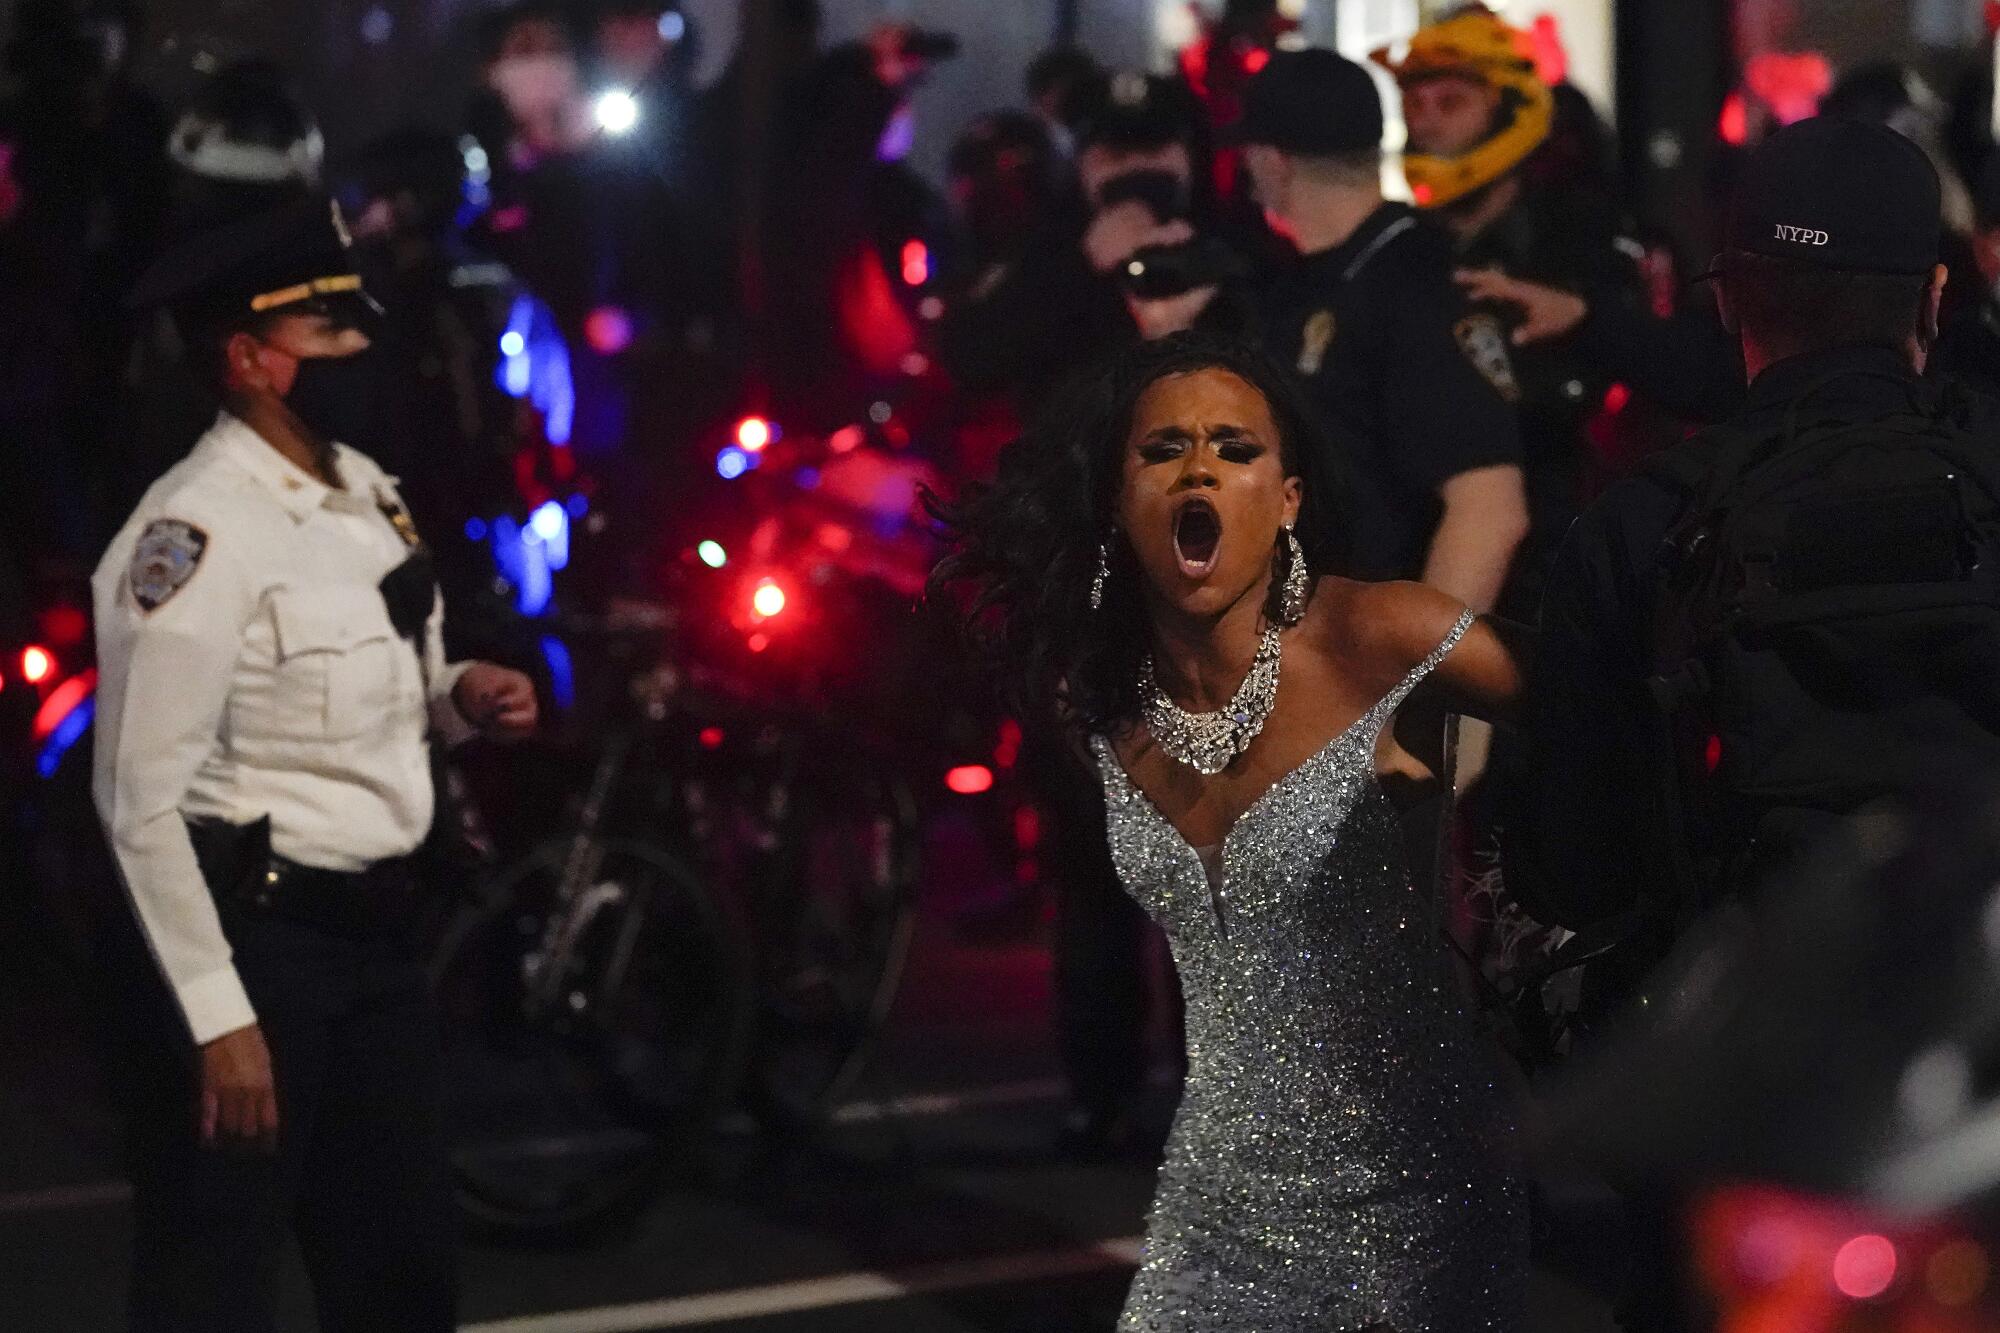 A drag queen in a silver sequined dress yells as they are arrested by police